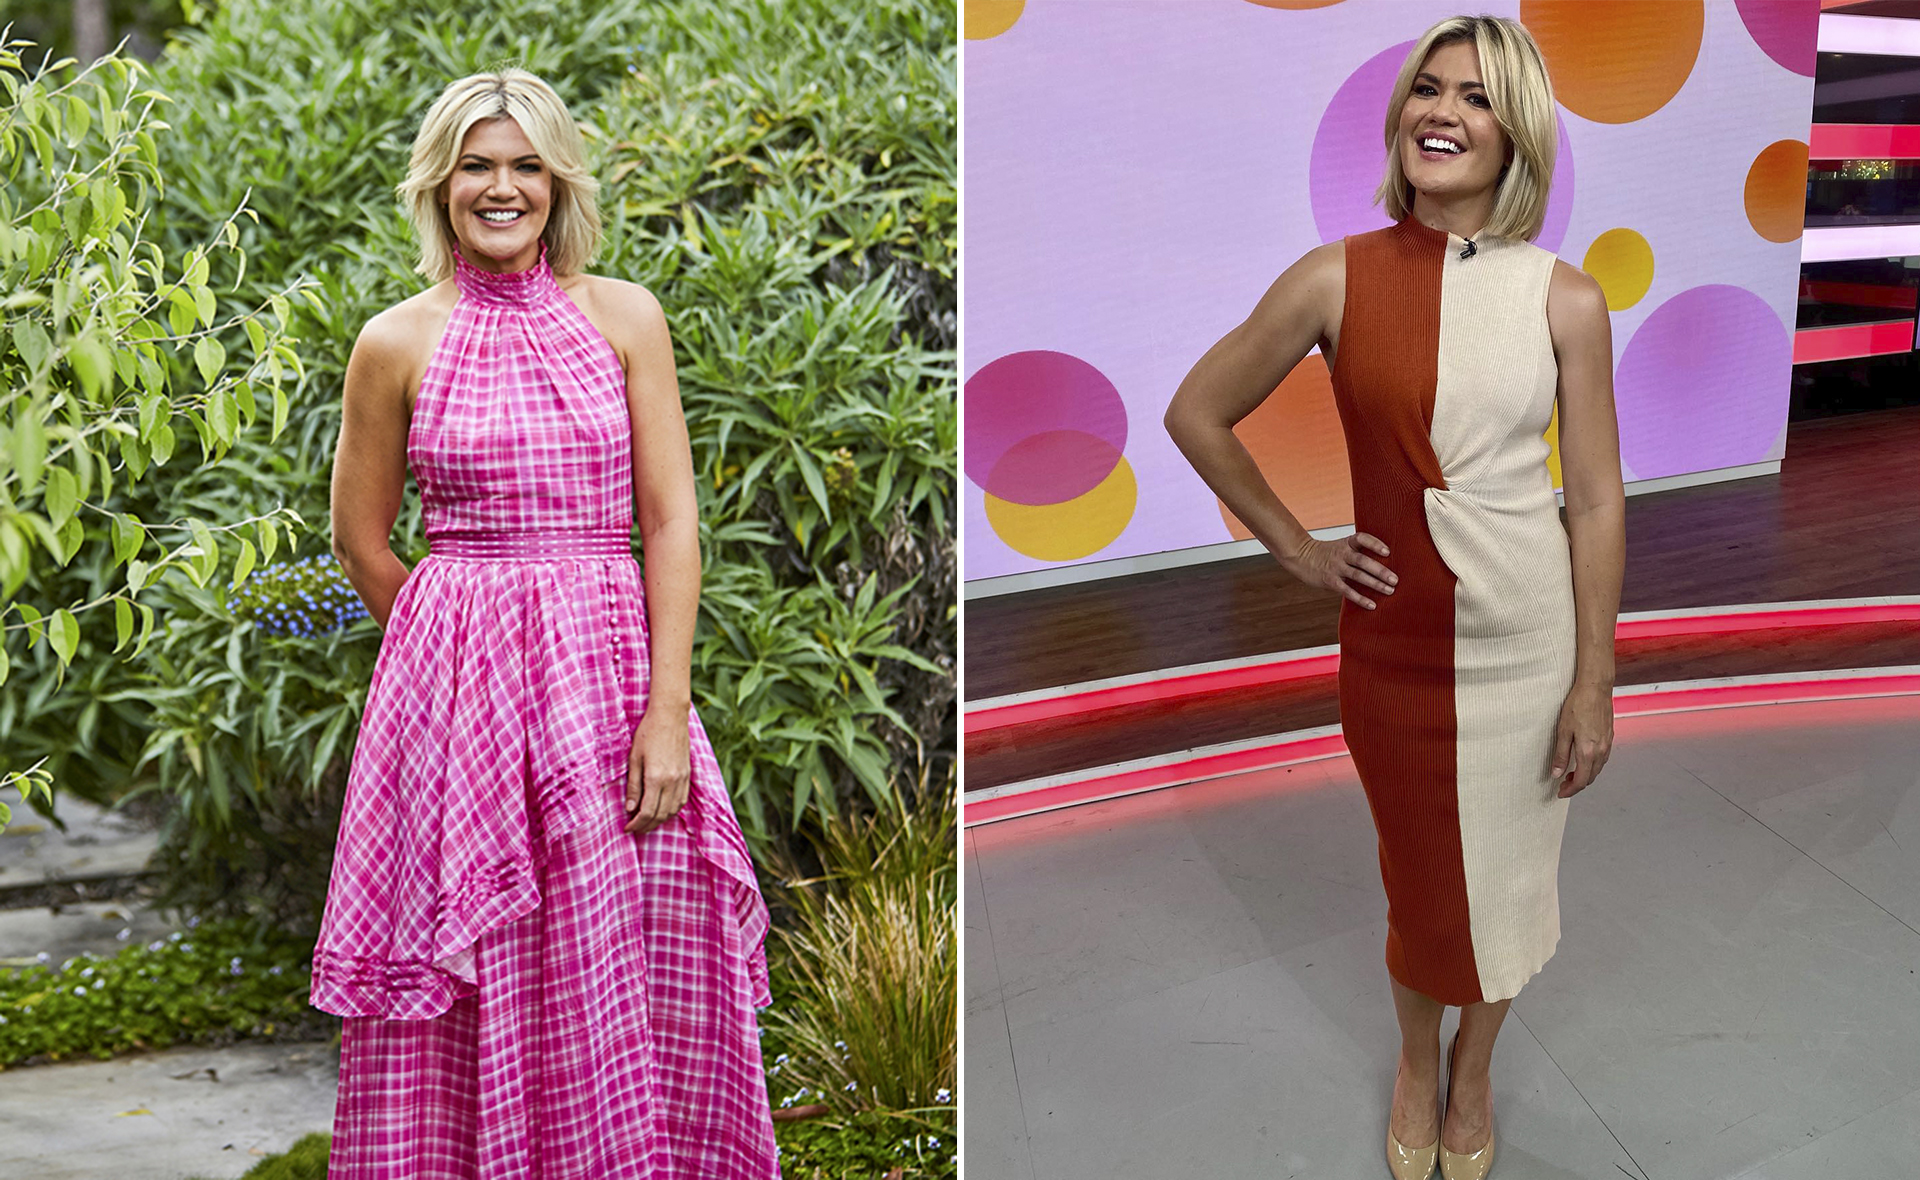 EXCLUSIVE: “It’s a process”: Studio 10 host Sarah Harris reveals how she coped with the breakdown of her marriage